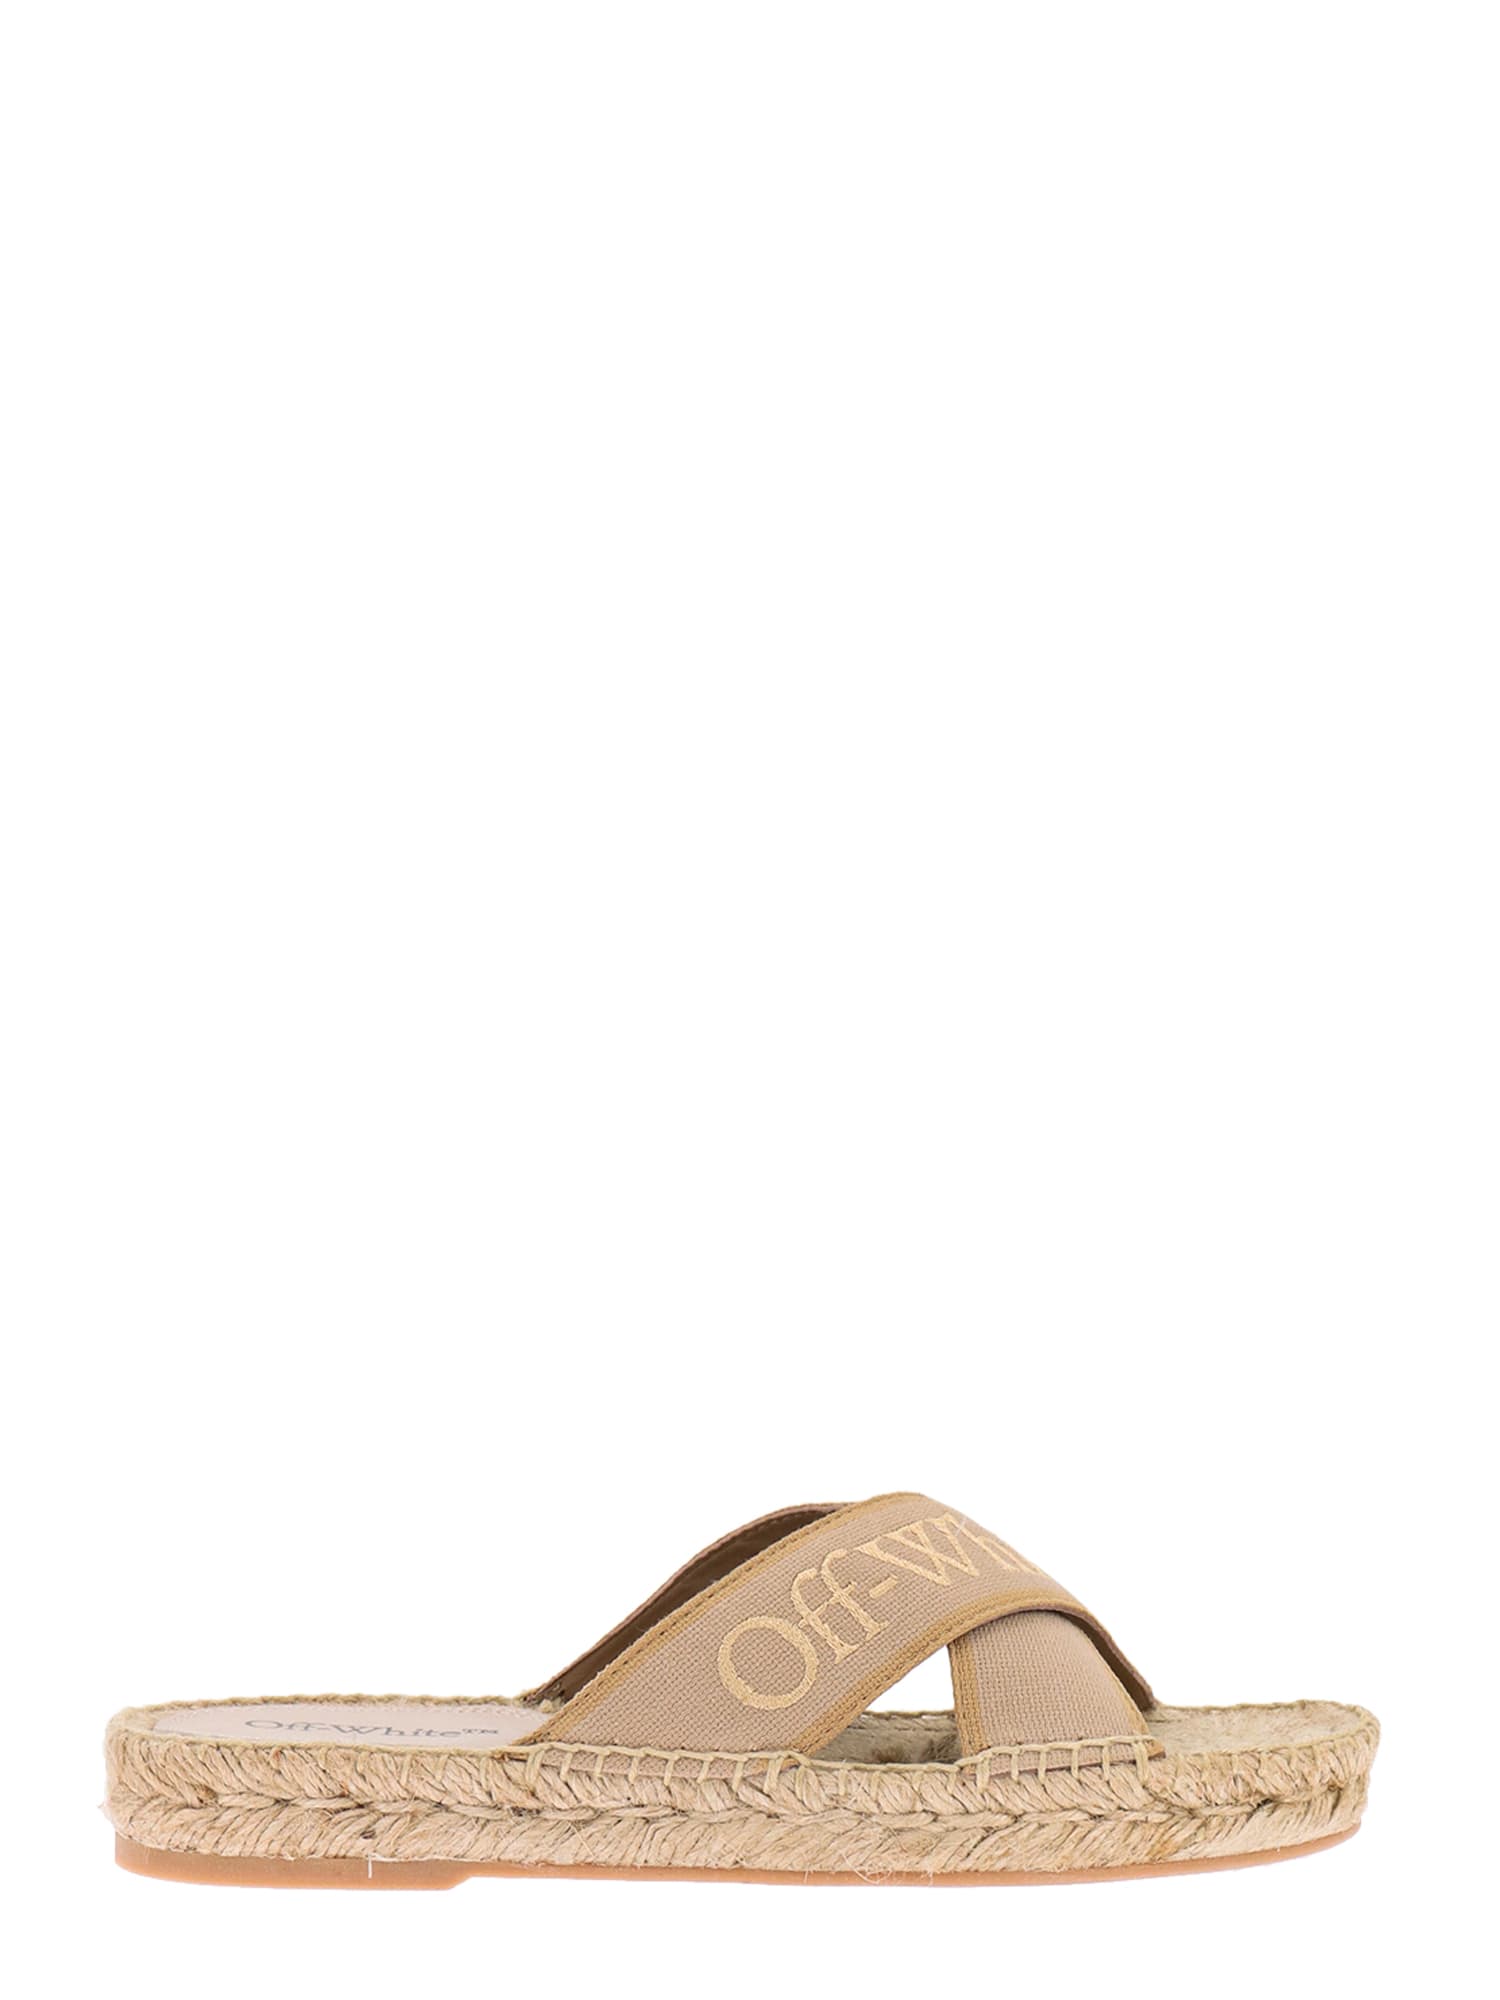 Off-White Bookish Criss Cross Sandals